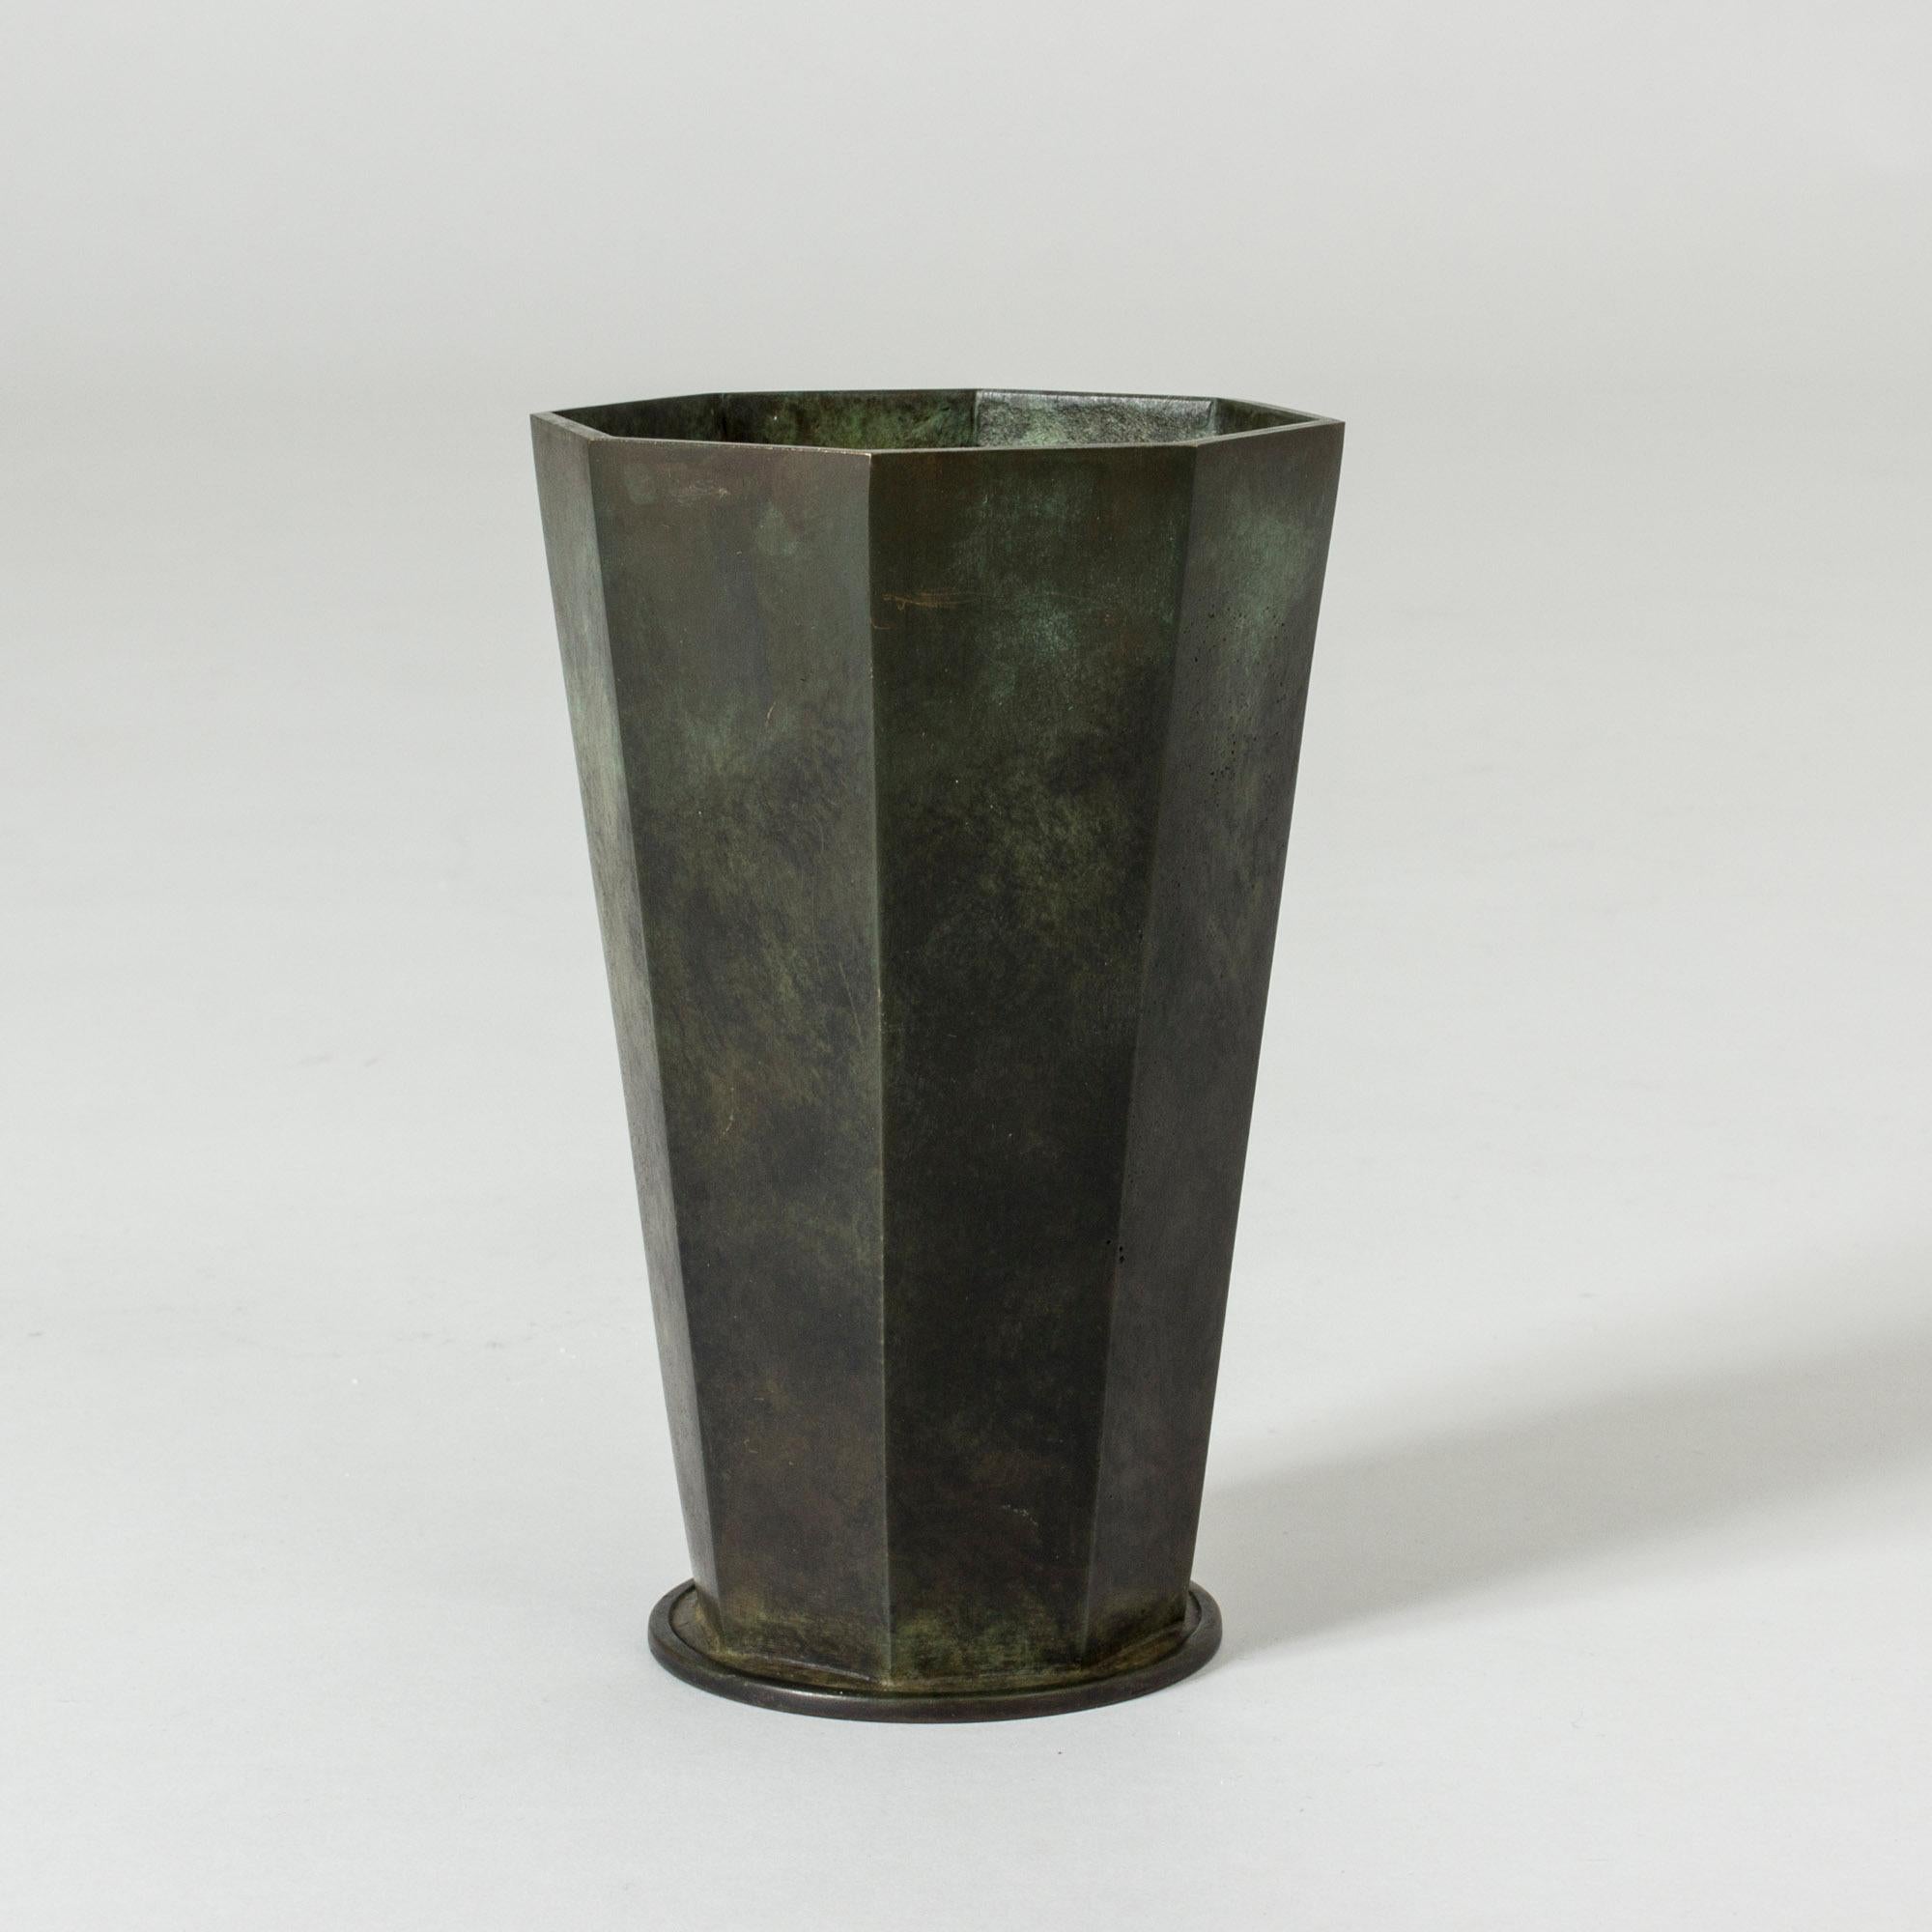 Elegant patinated bronze vase from GAB in a graphic, conical octagon shape. Heavy quality.